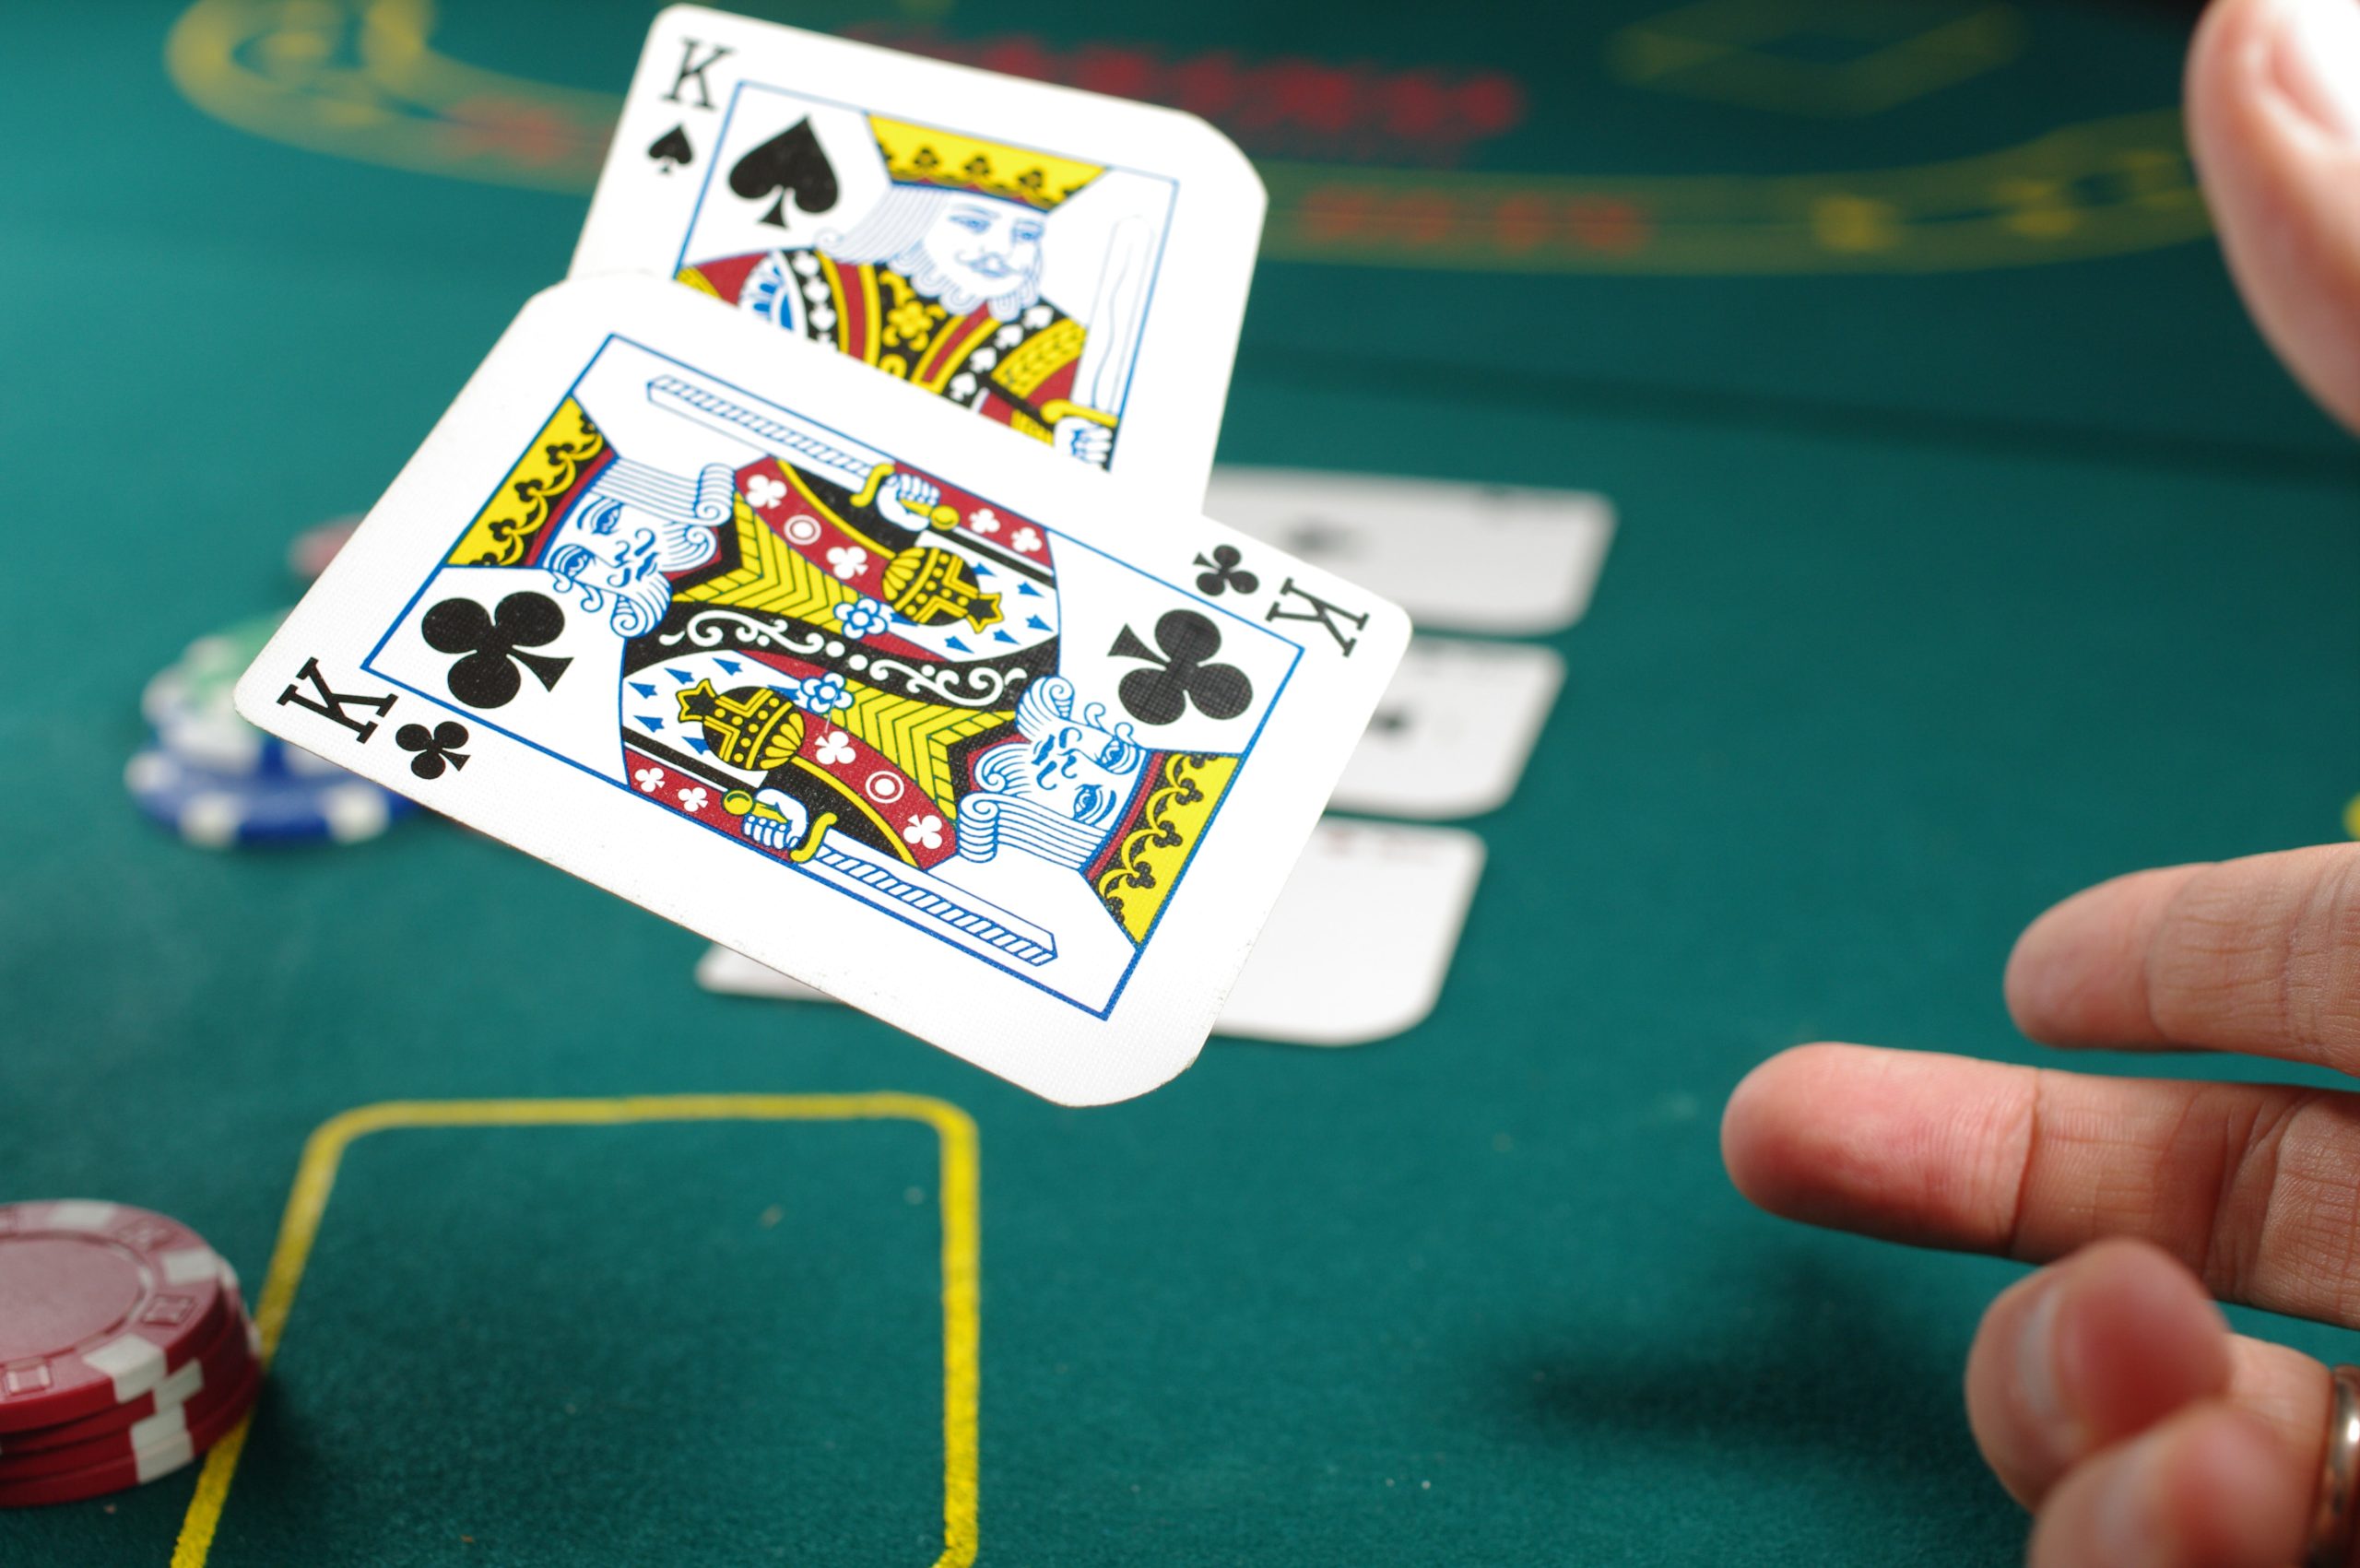 In an article about the best casinos in the world, a person flips two playing cards in the air.